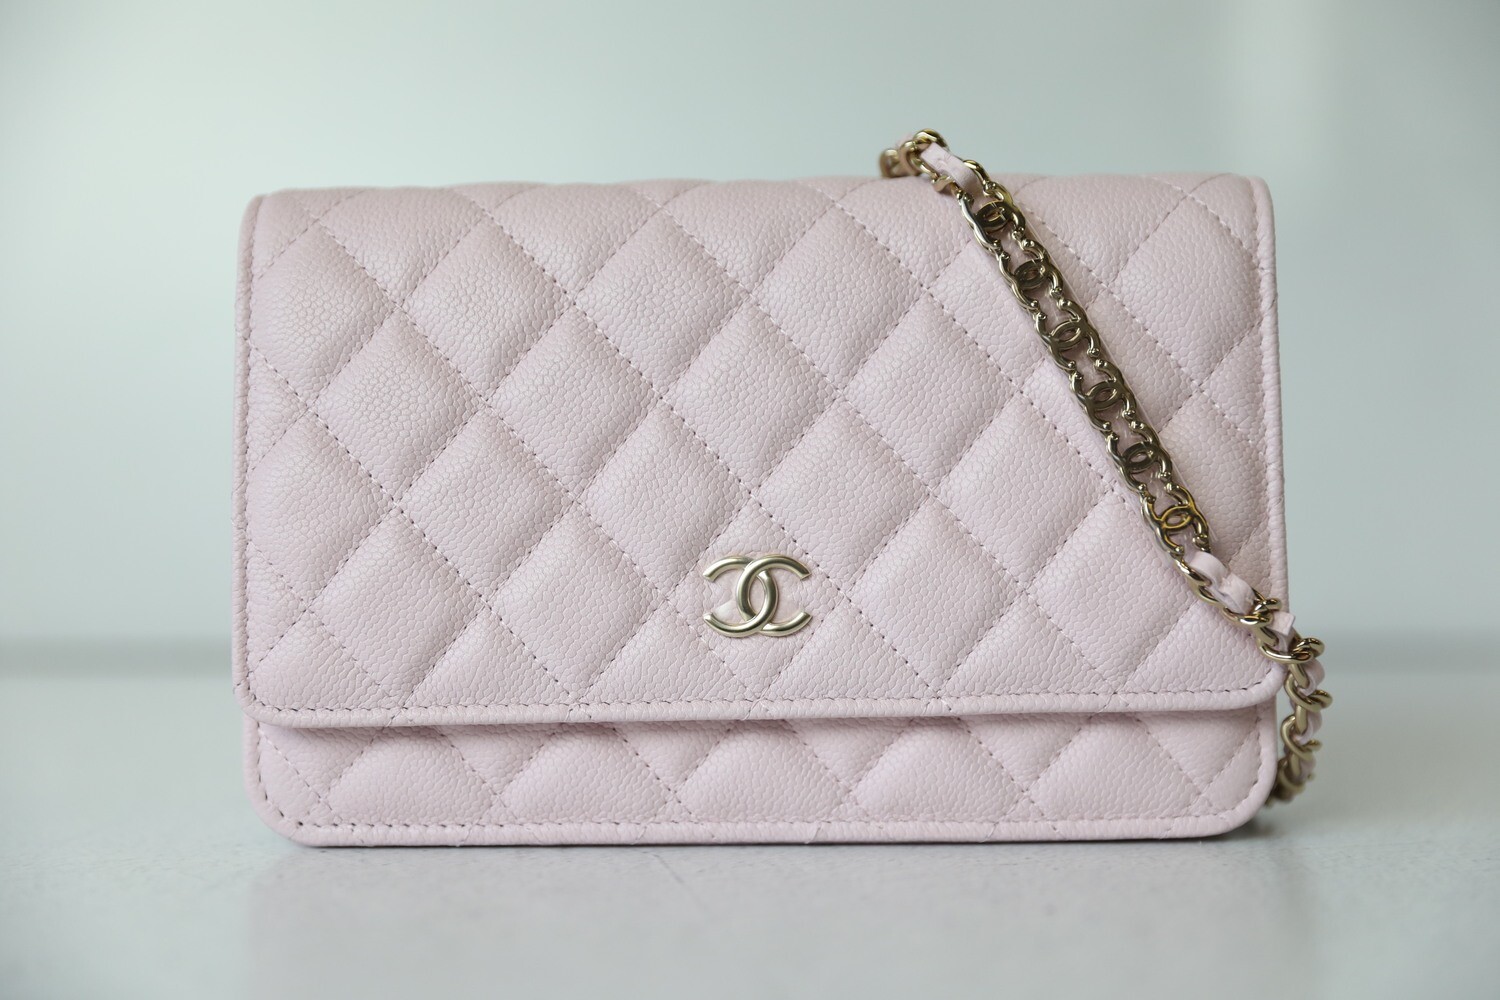 Chanel Wallet on Chain with CC Chain, Pink with Gold Hardware, New